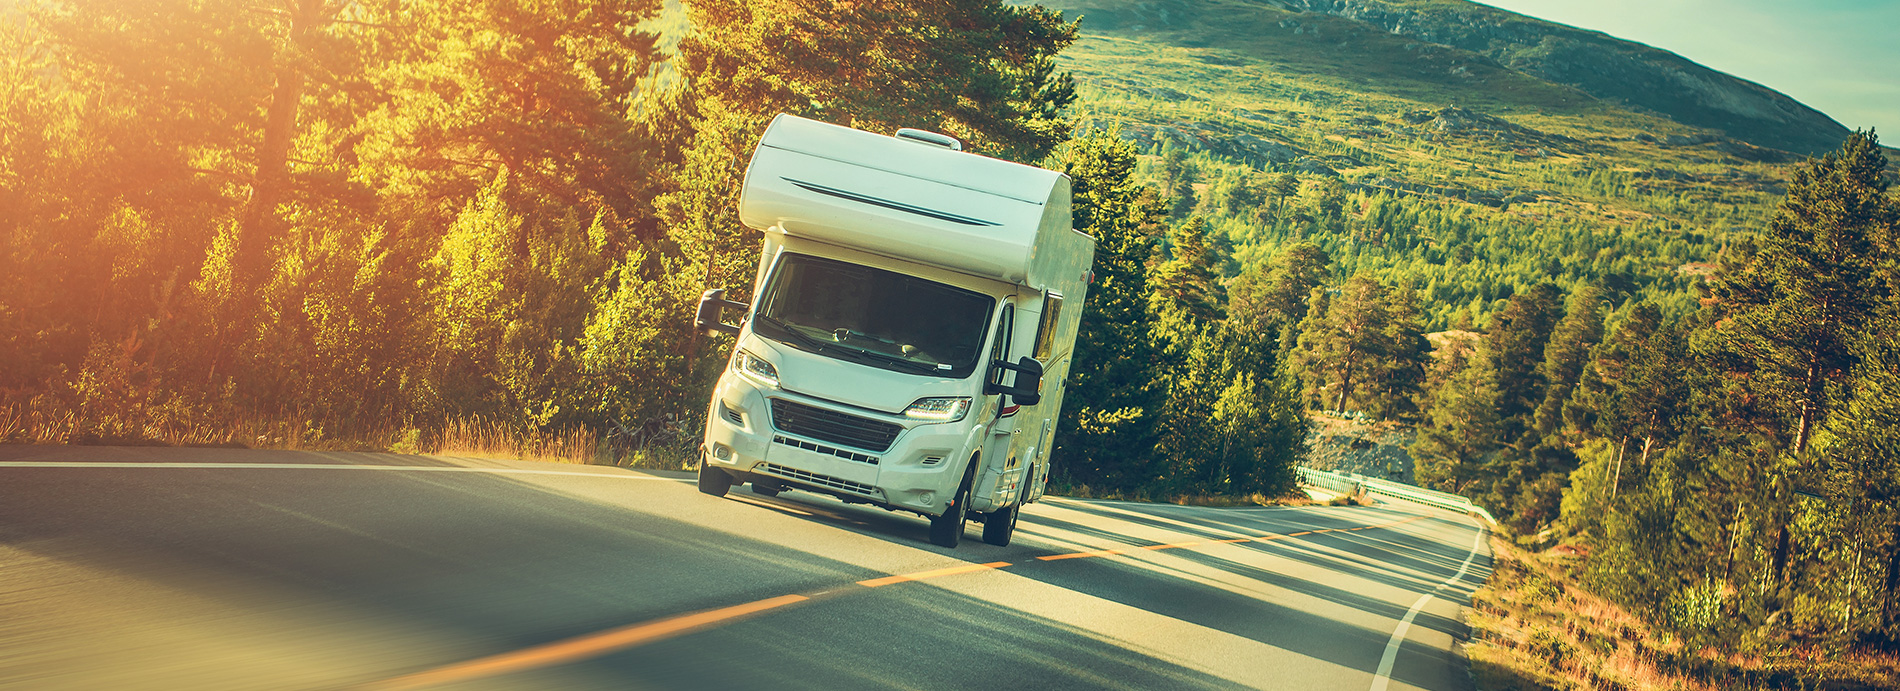 Save on RV Rentals & More with American Discount Vacations!